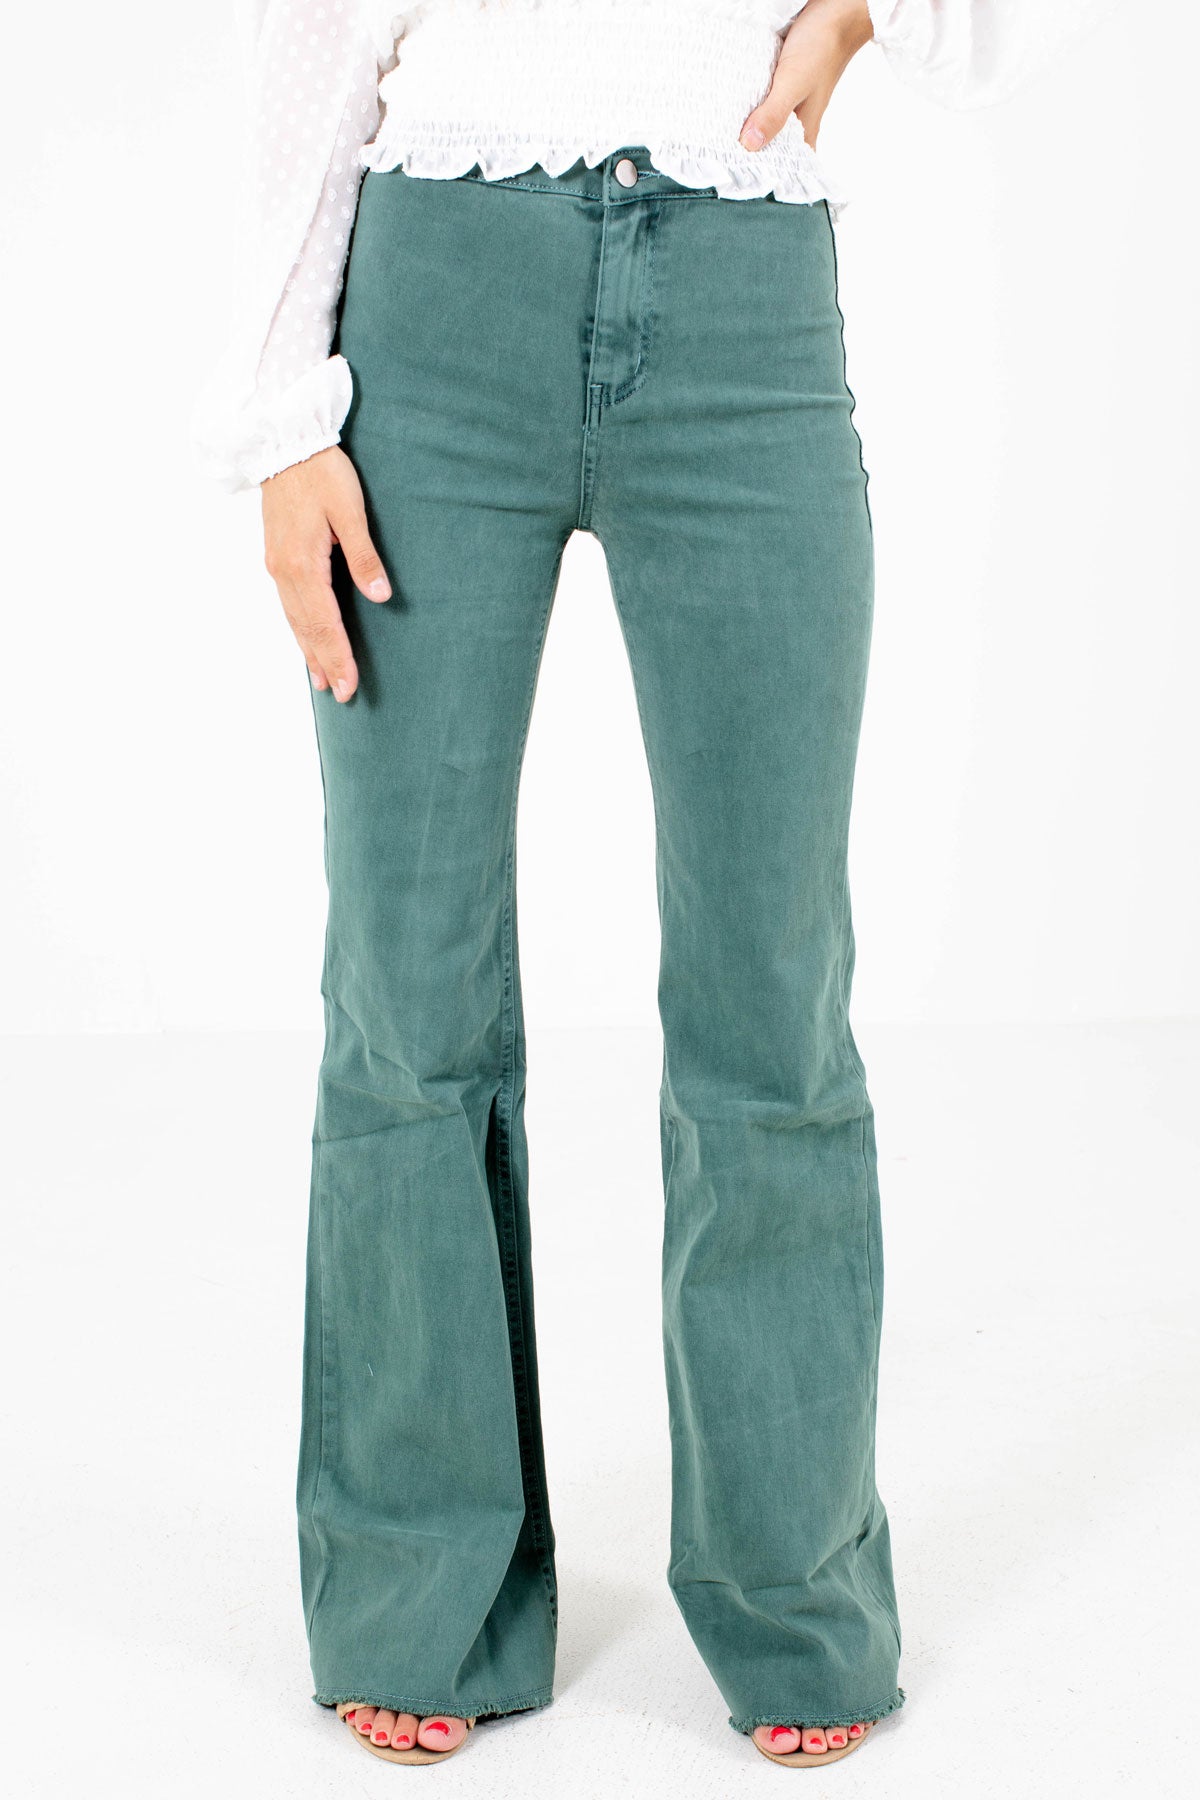 Women's Pine Green Casual Everyday Boutique Jeans